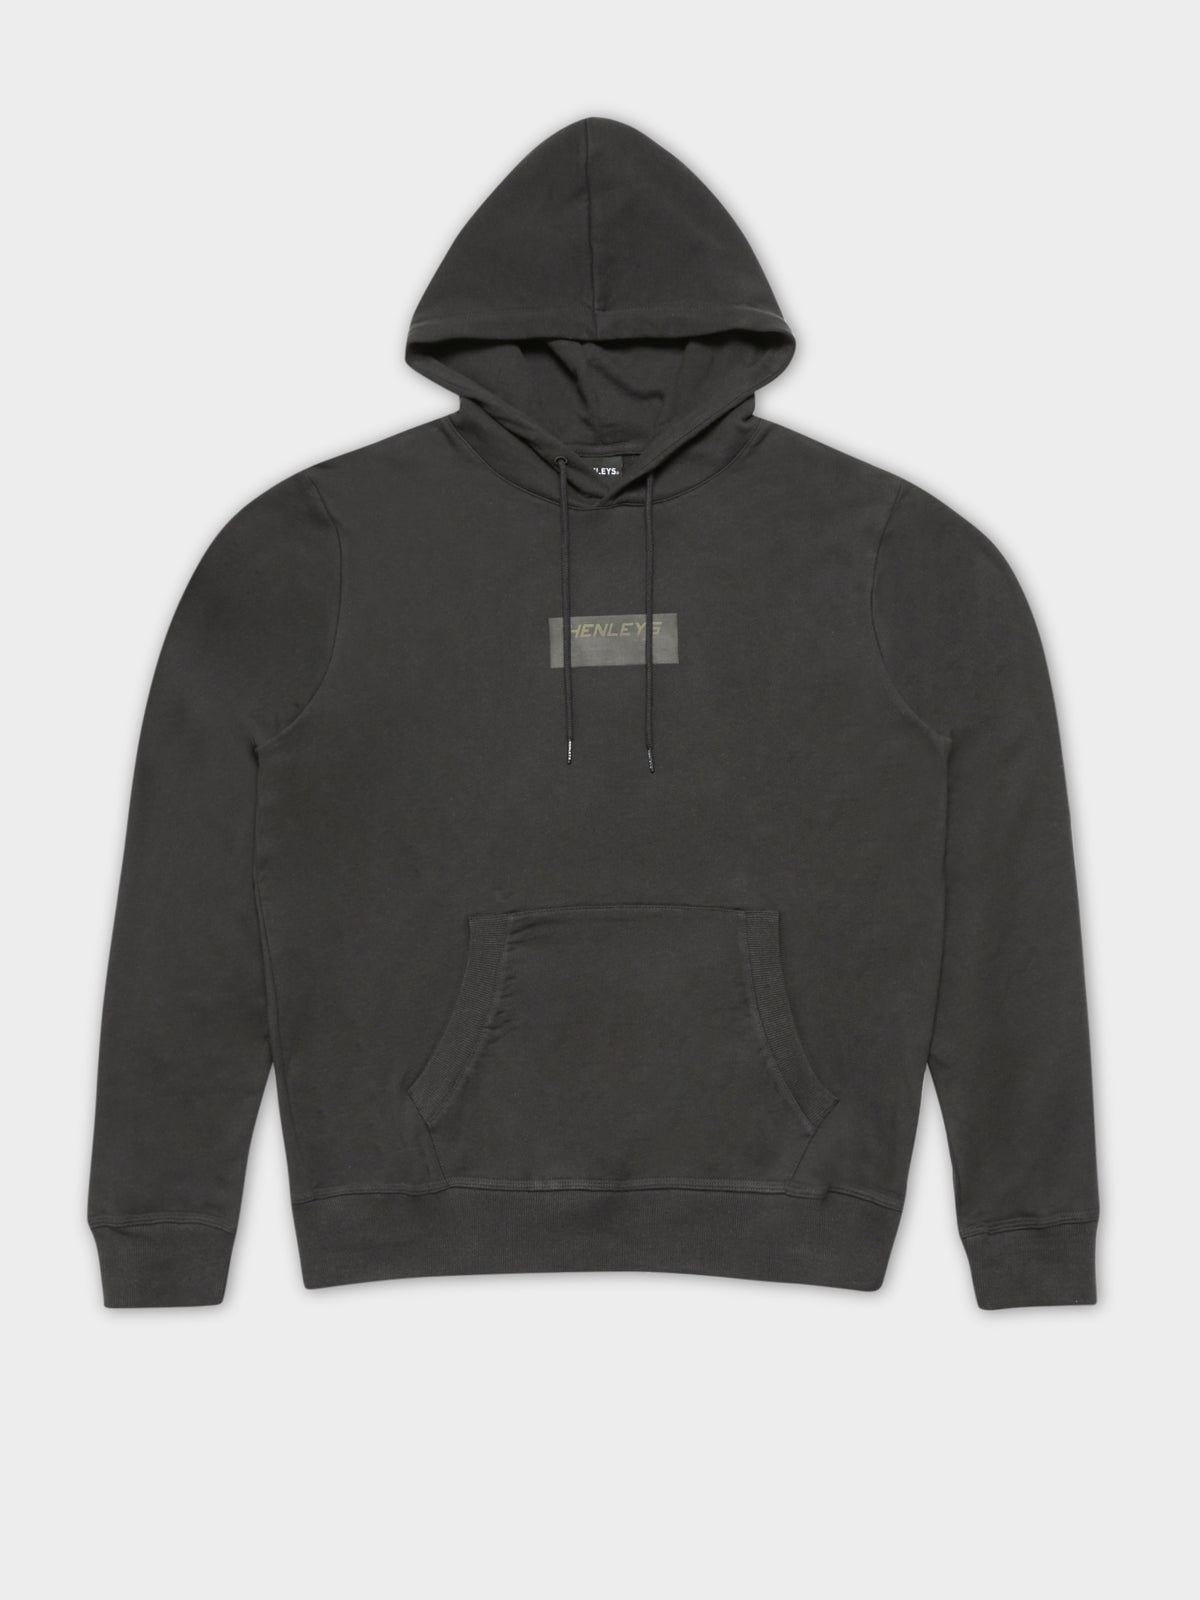 Quiver Hooded Sweater in Coal